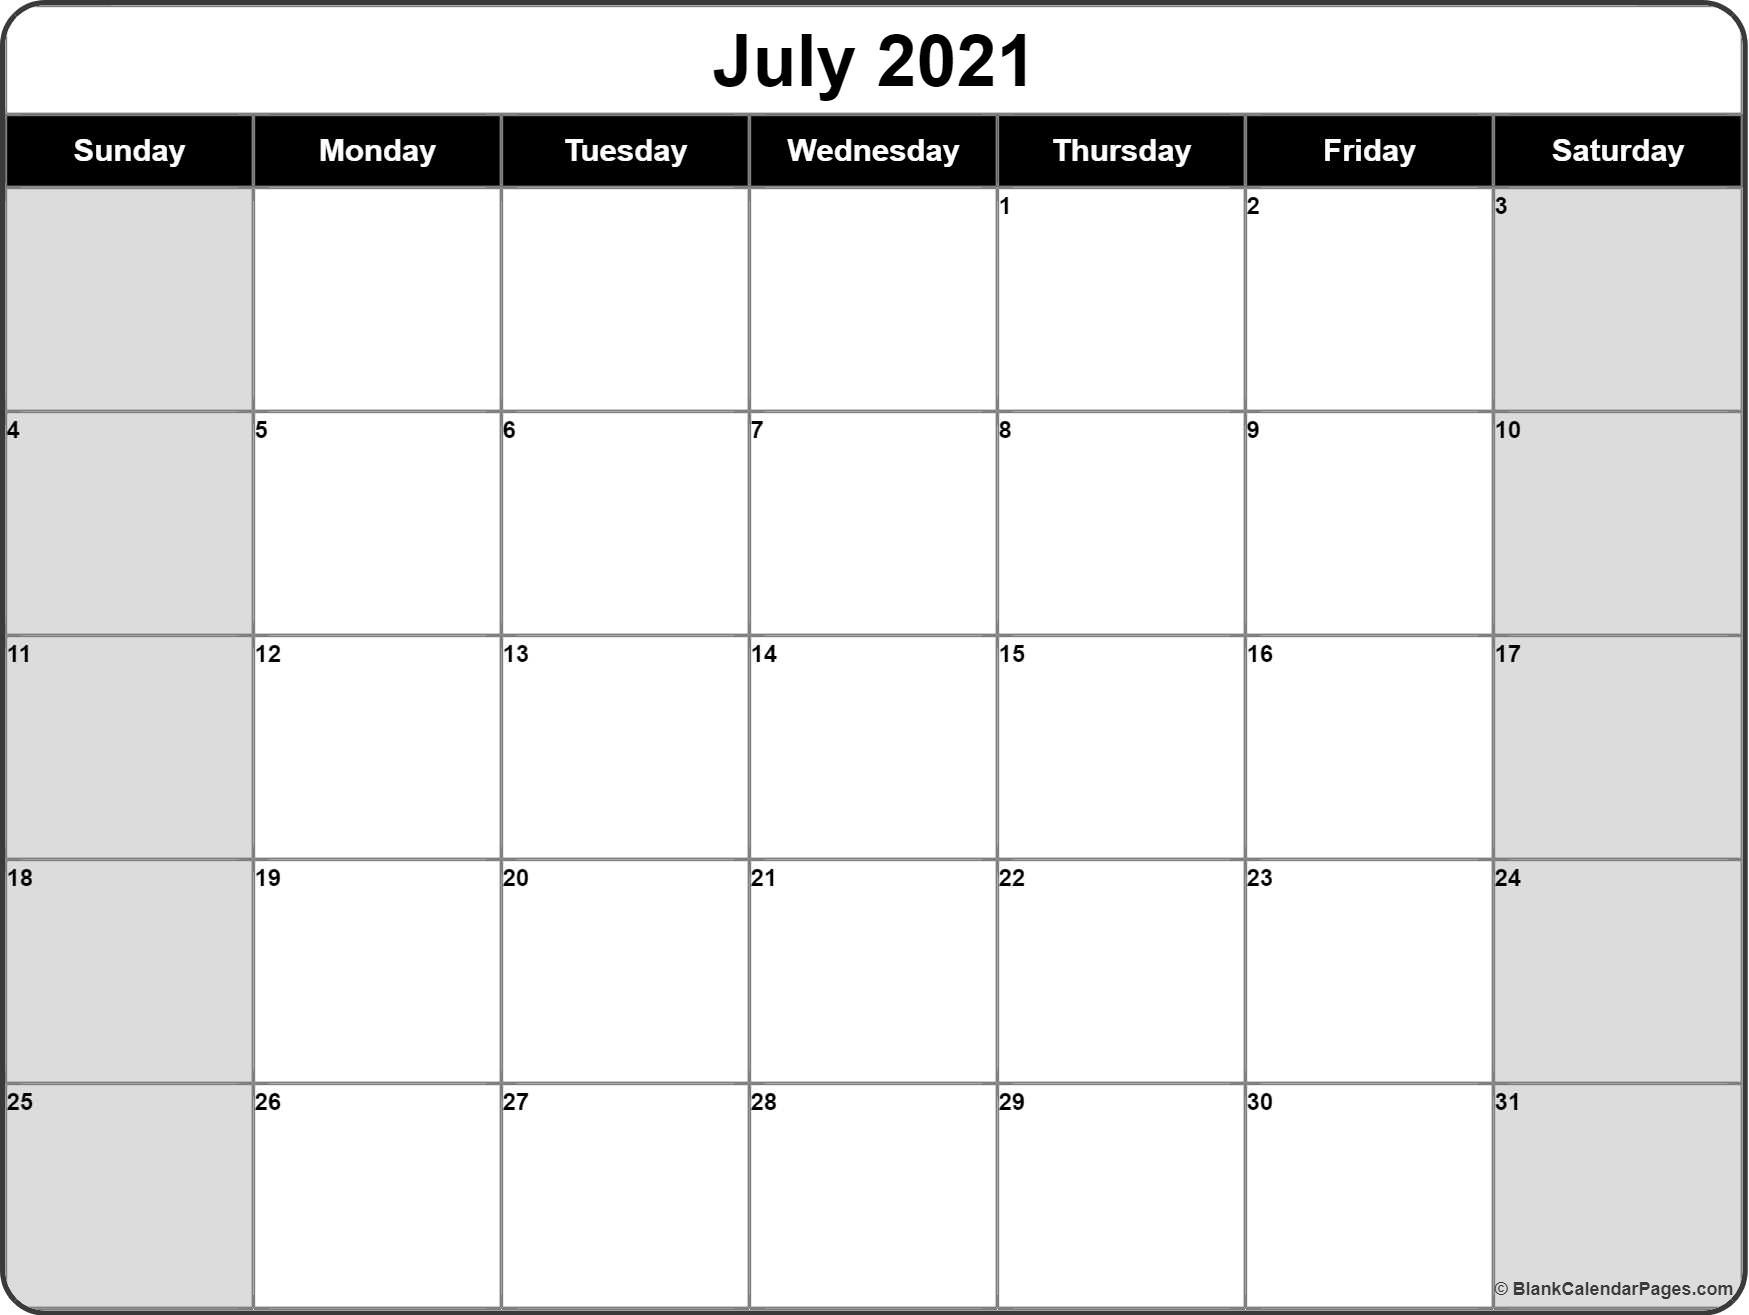 July 2021 Calendar | Free Printable Calendar Templates-Free Monthly 5 Day Schedules For 2021